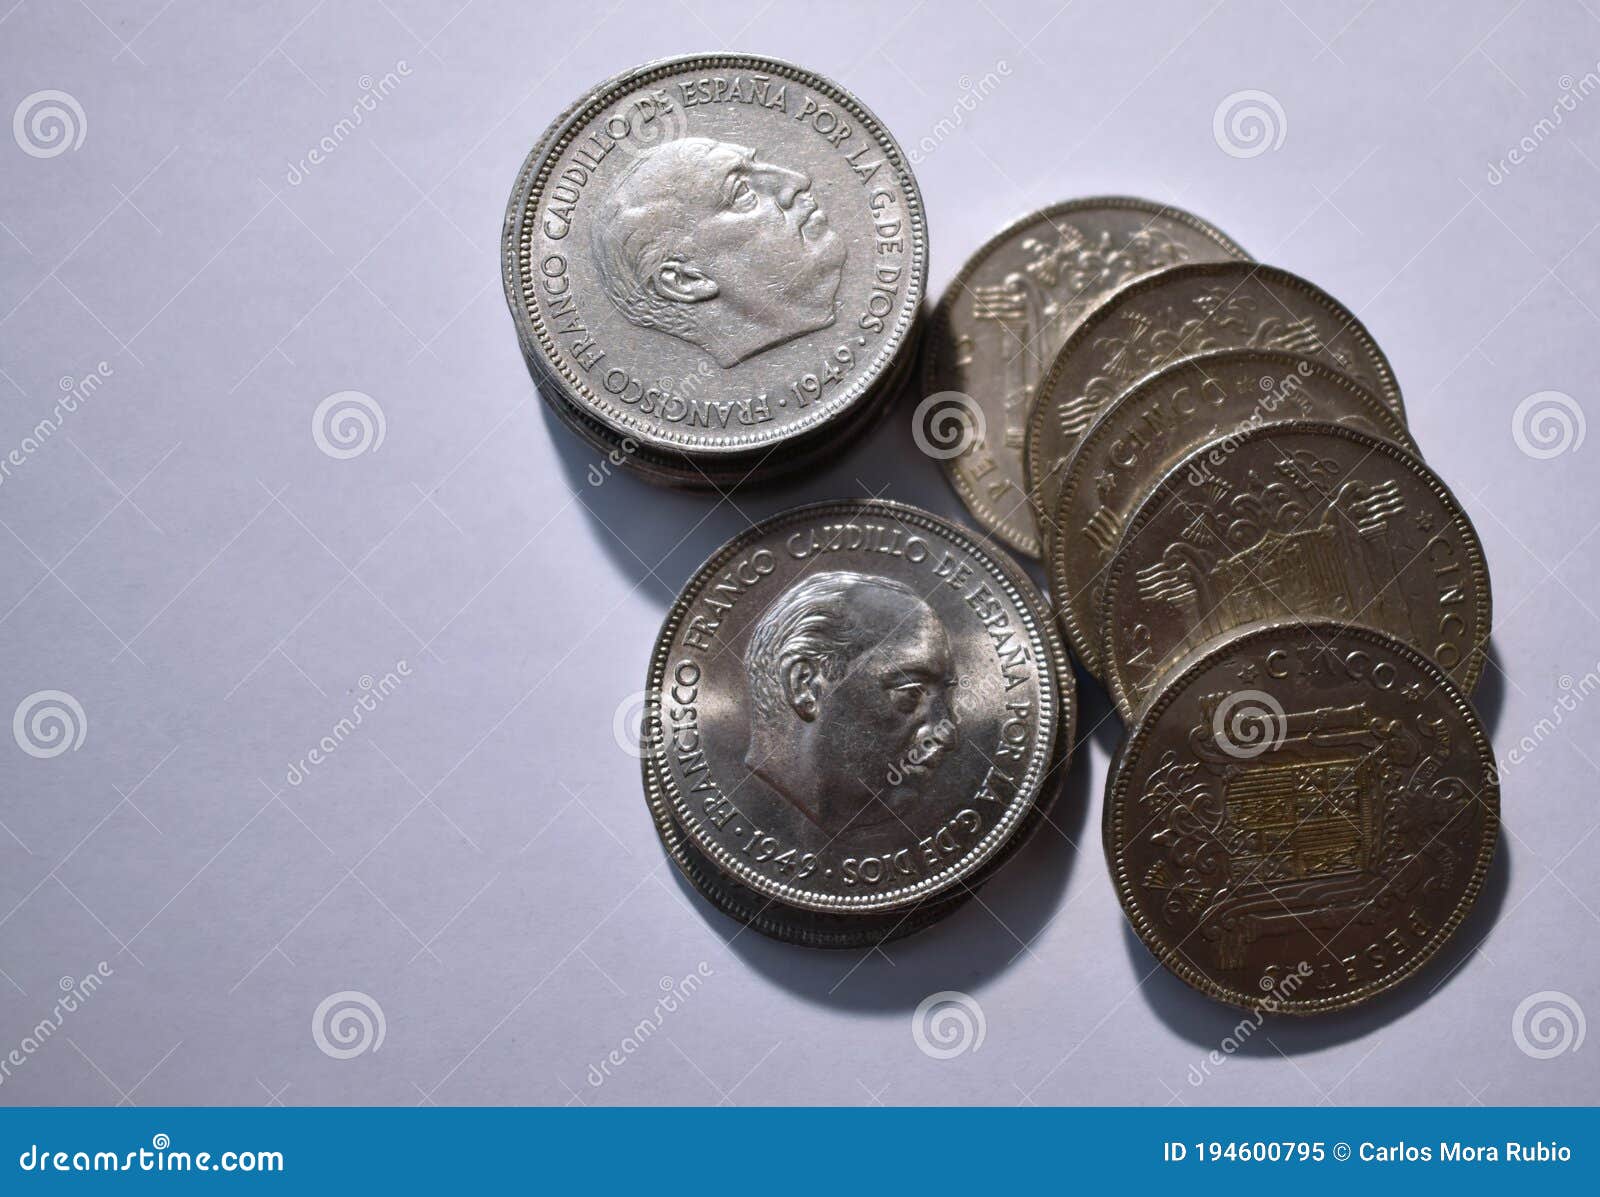 cenital view of a pile of five peseta coins from 1949 and white background